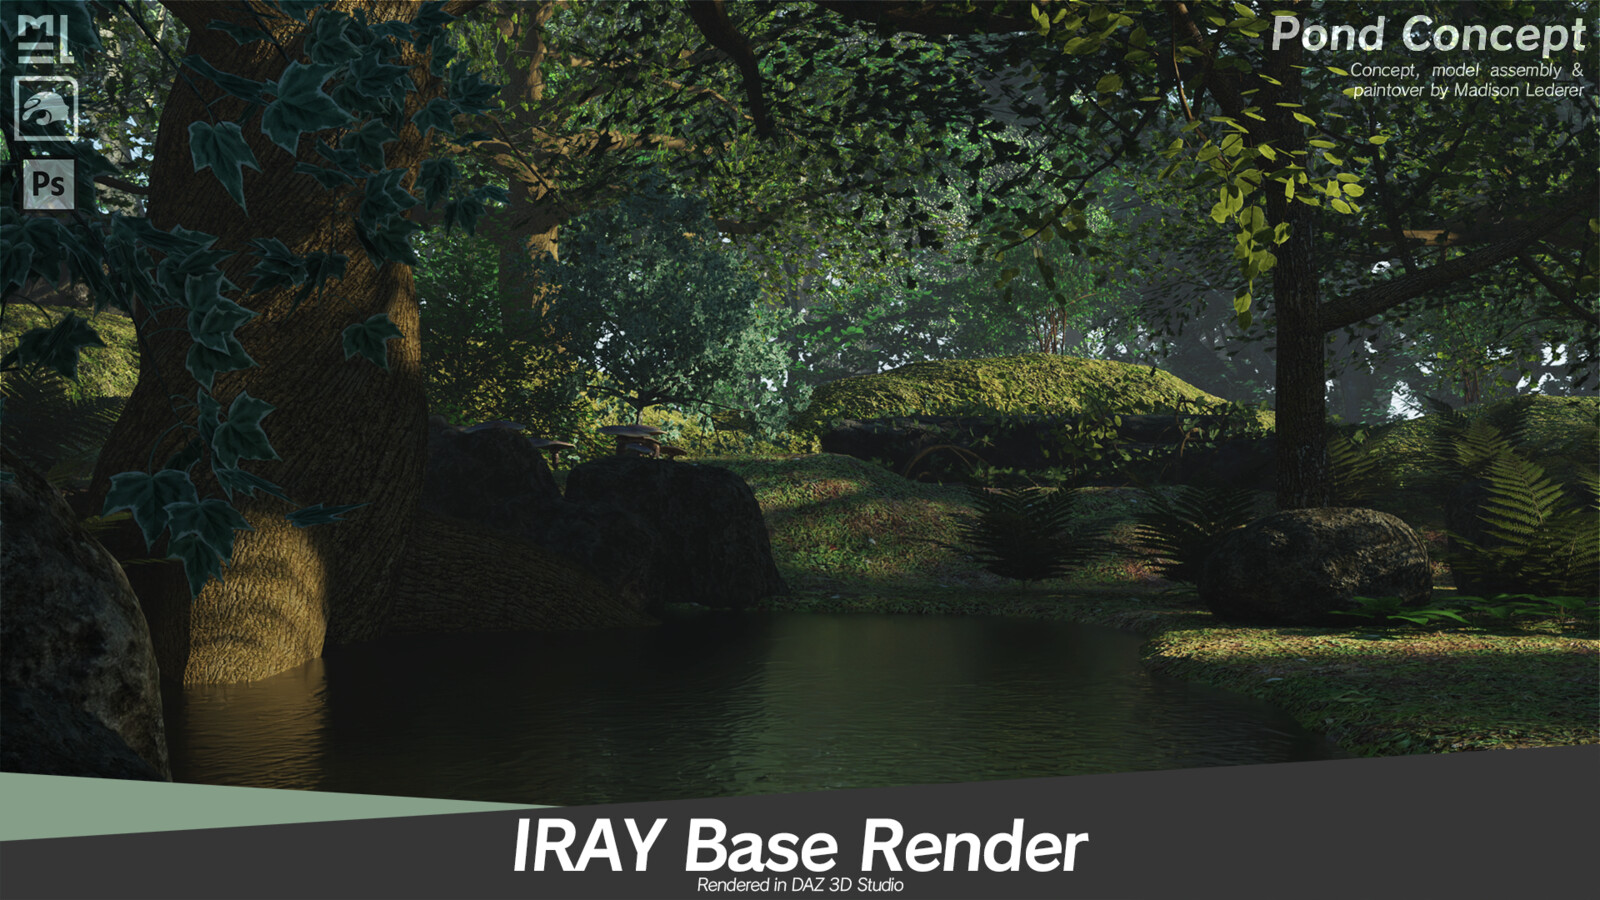 Base render using IRAY's environmental settings w/ the asset's default textures to establish lighting and basic colour &amp; detail.